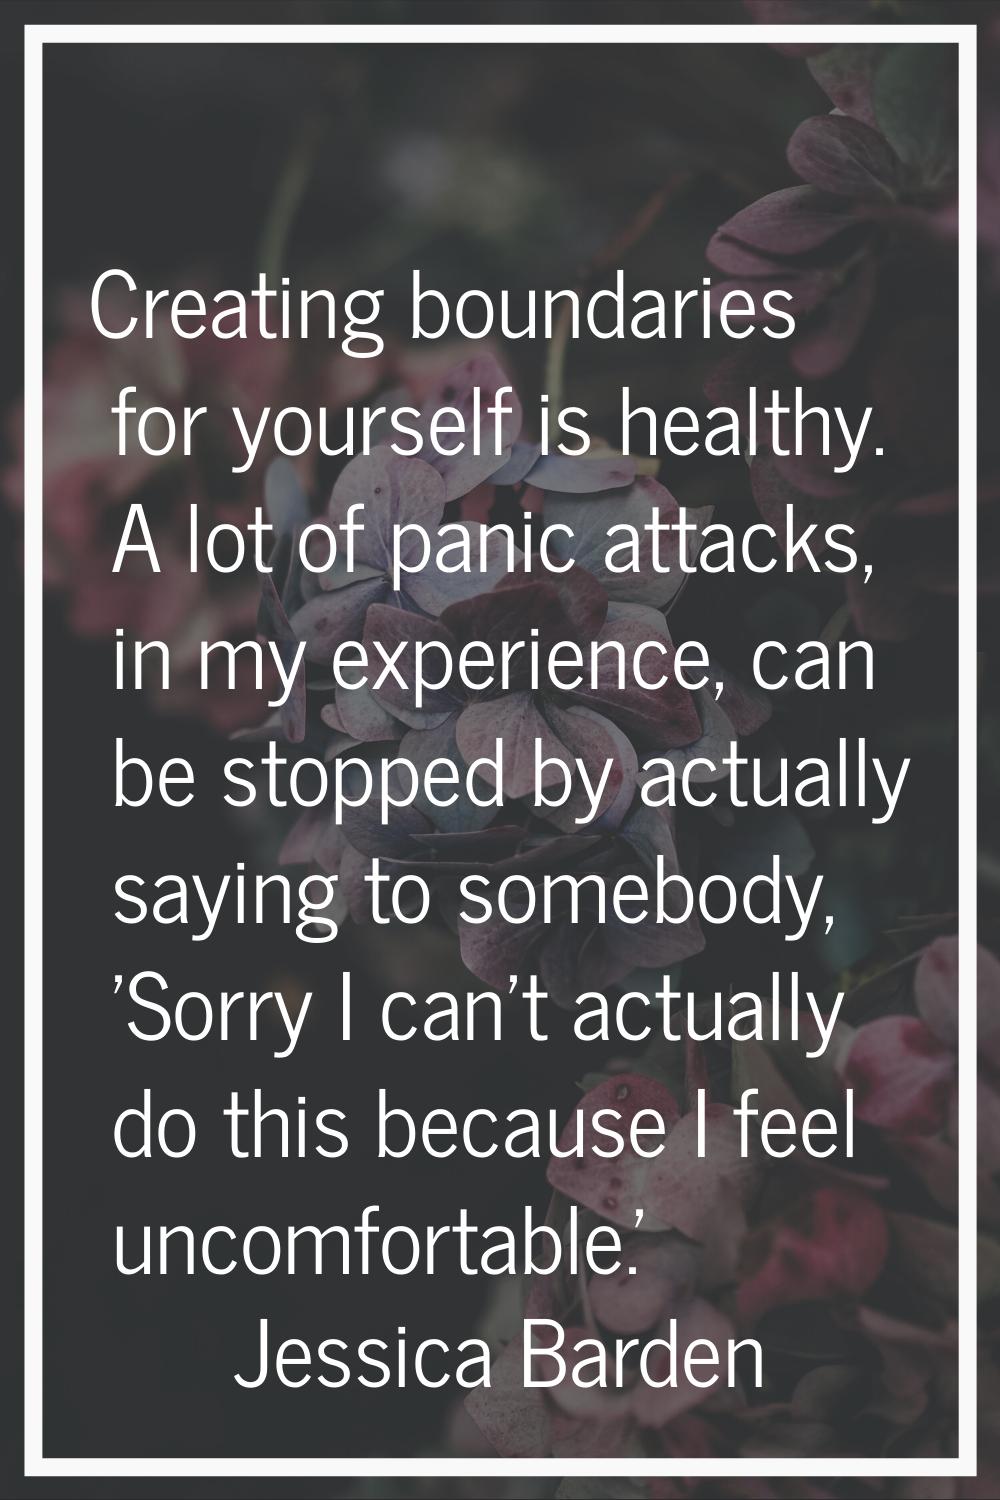 Creating boundaries for yourself is healthy. A lot of panic attacks, in my experience, can be stopp